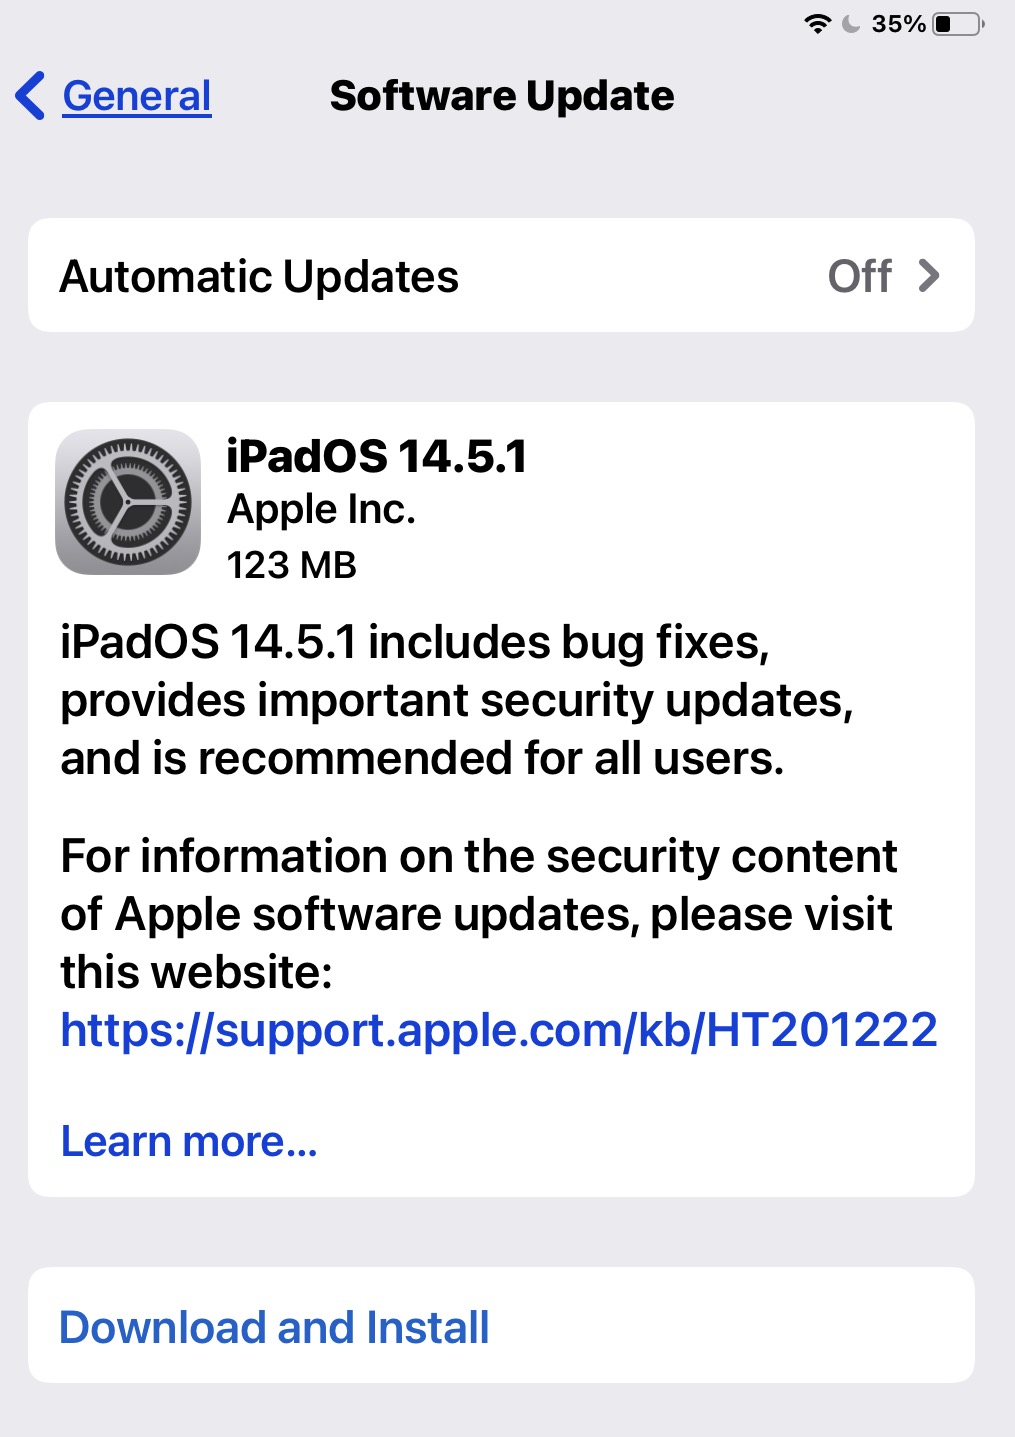 Problems with iOS 14.5.1 Update? Can’t Install? Battery Draining Issues?